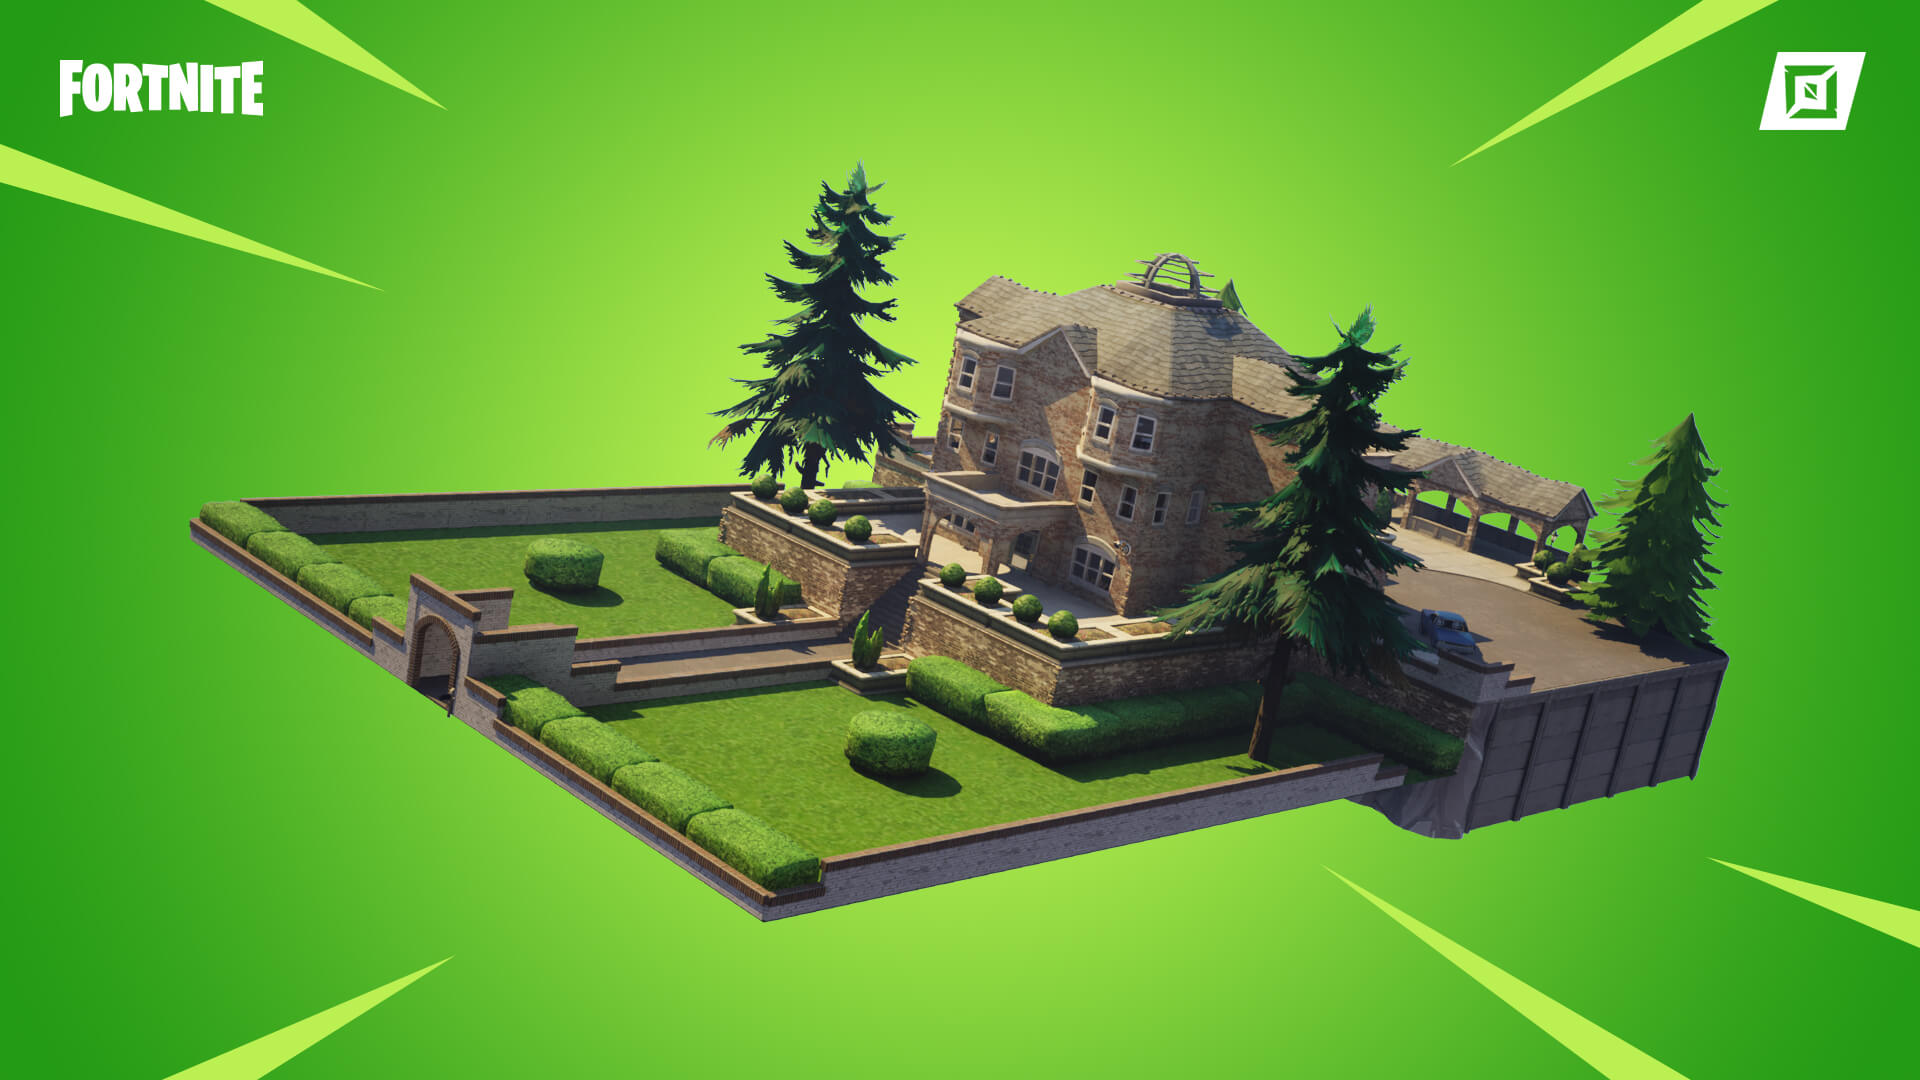 Image for Fortnite v10.30 update adds Greasy Grove and Moisty Palms Rift Zones